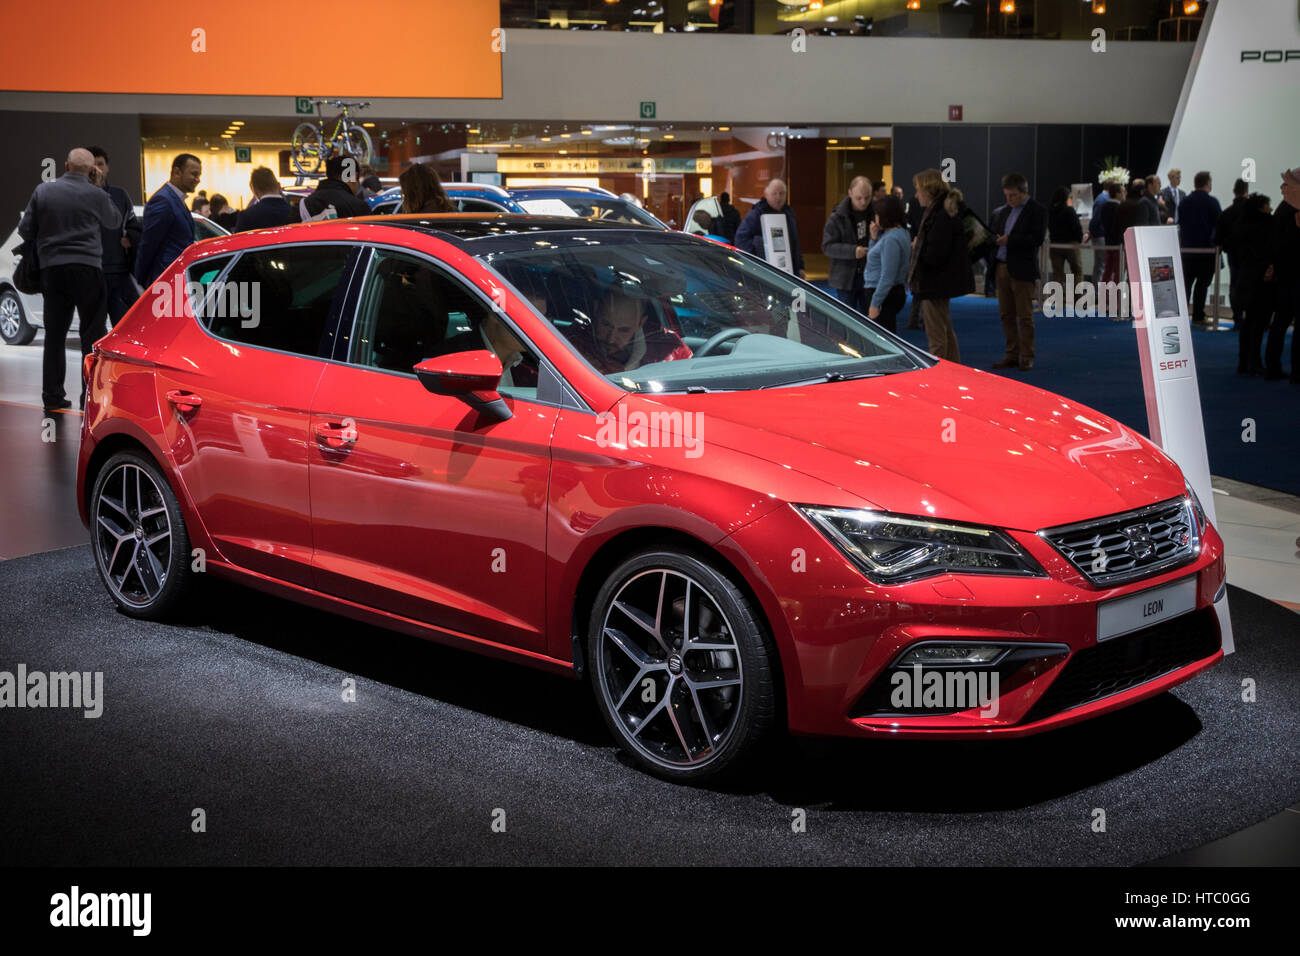 BRUSSELS - JAN 19, 2017: Seat Leon car presented at the Brussels Motor Show. Stock Photo